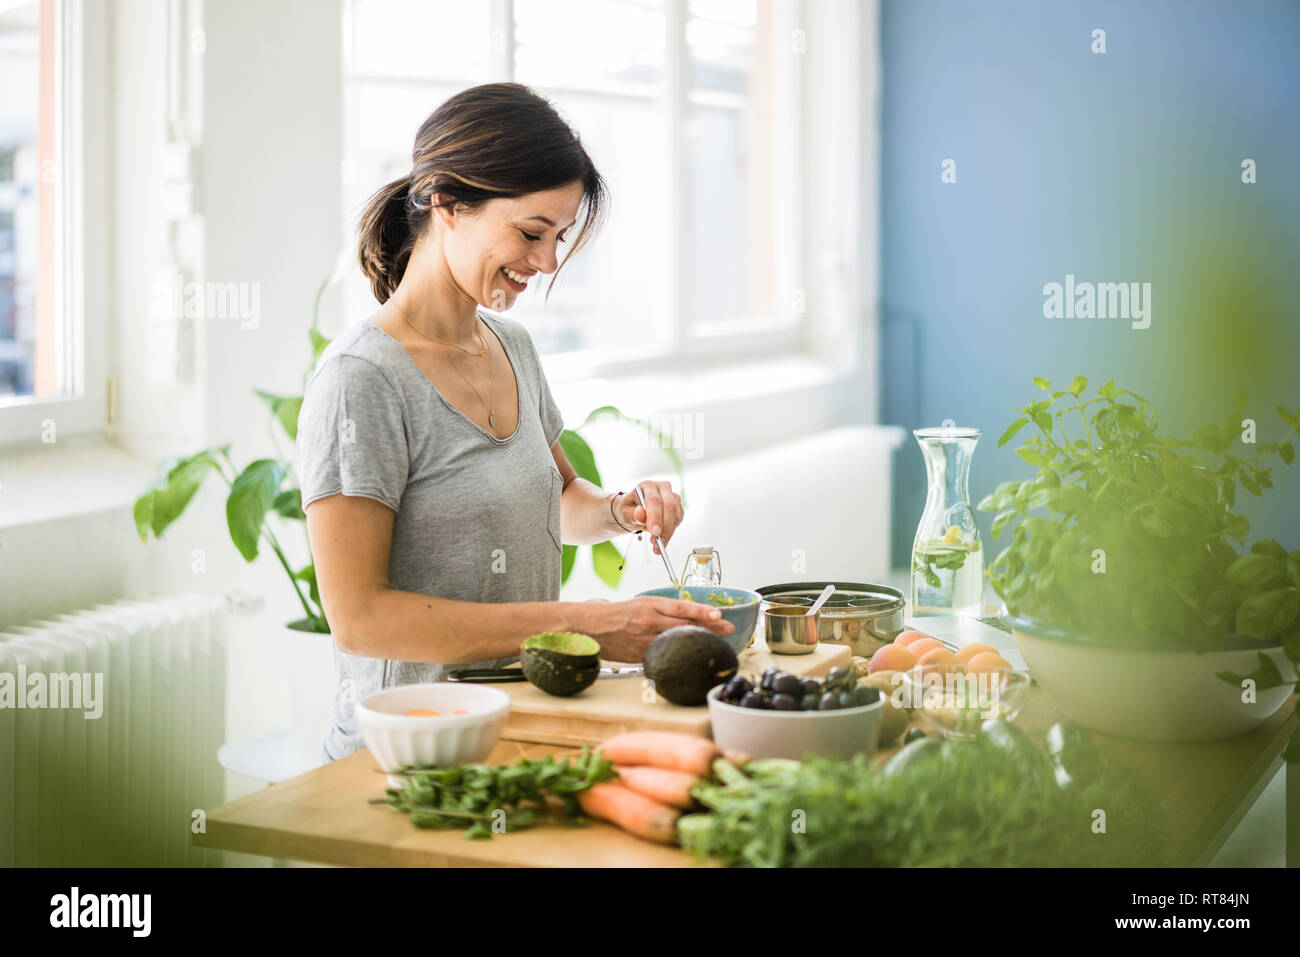 Woman preparing healthy food in her kitchen Stock Photo